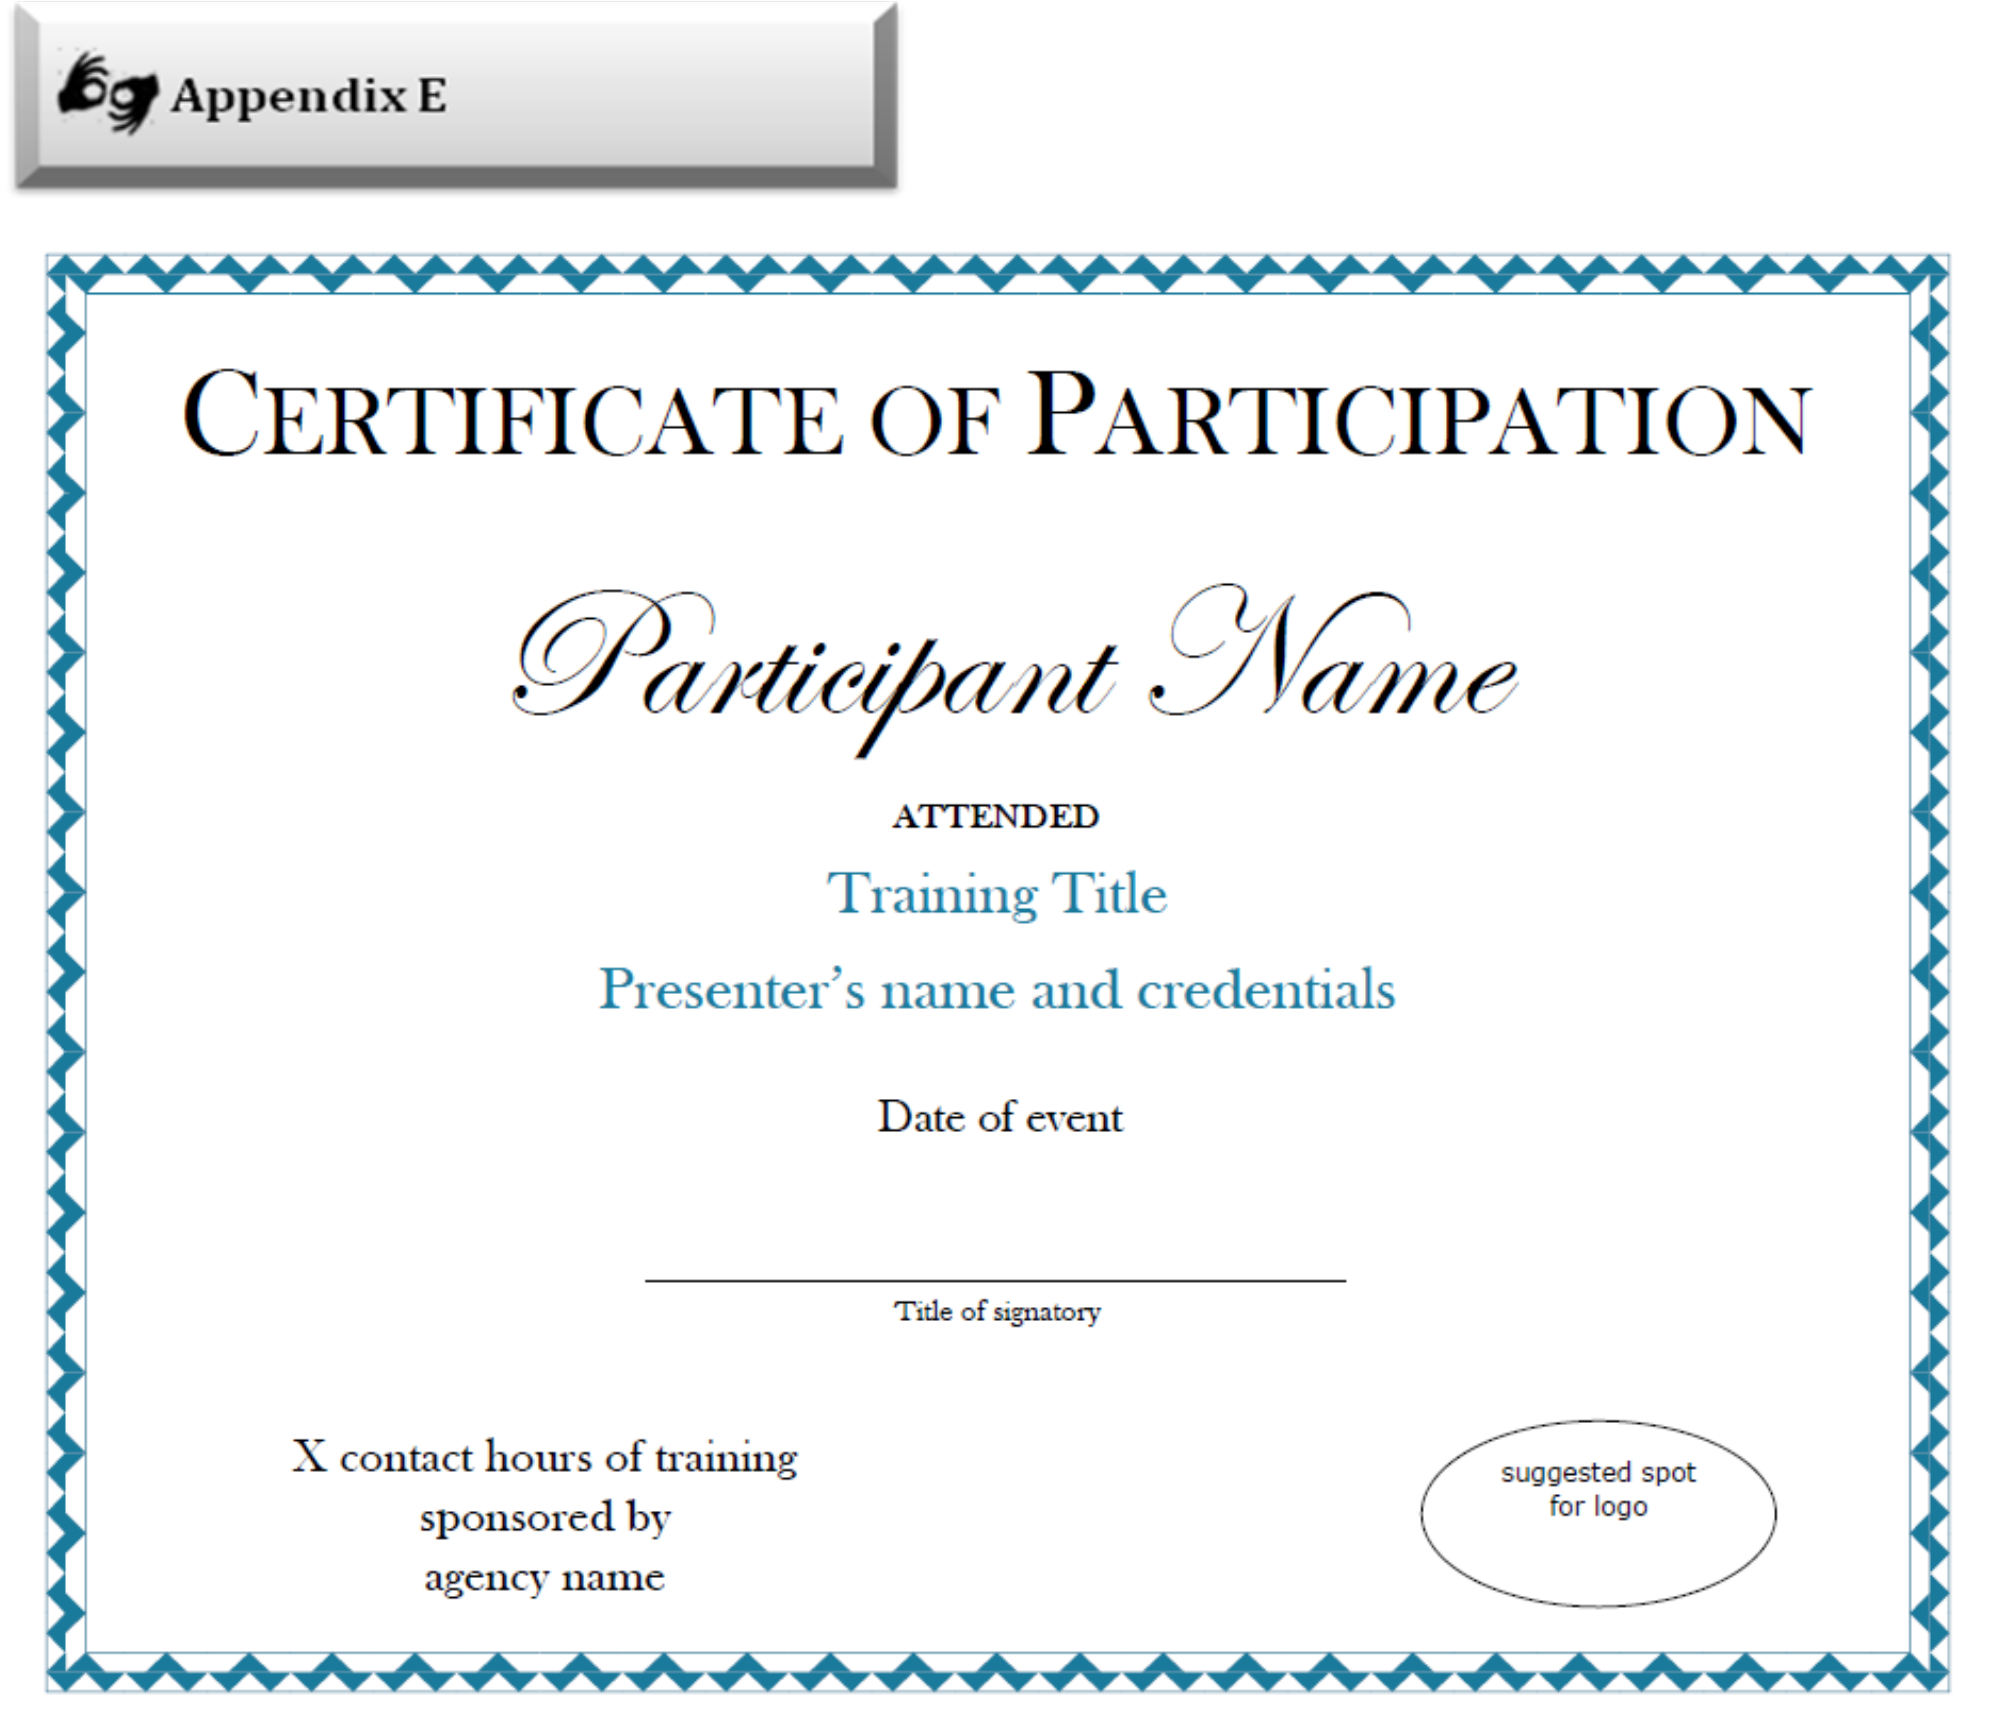 Certificate Of Participation Sample Free Download With Regard To Certificate Of Participation Template Pdf